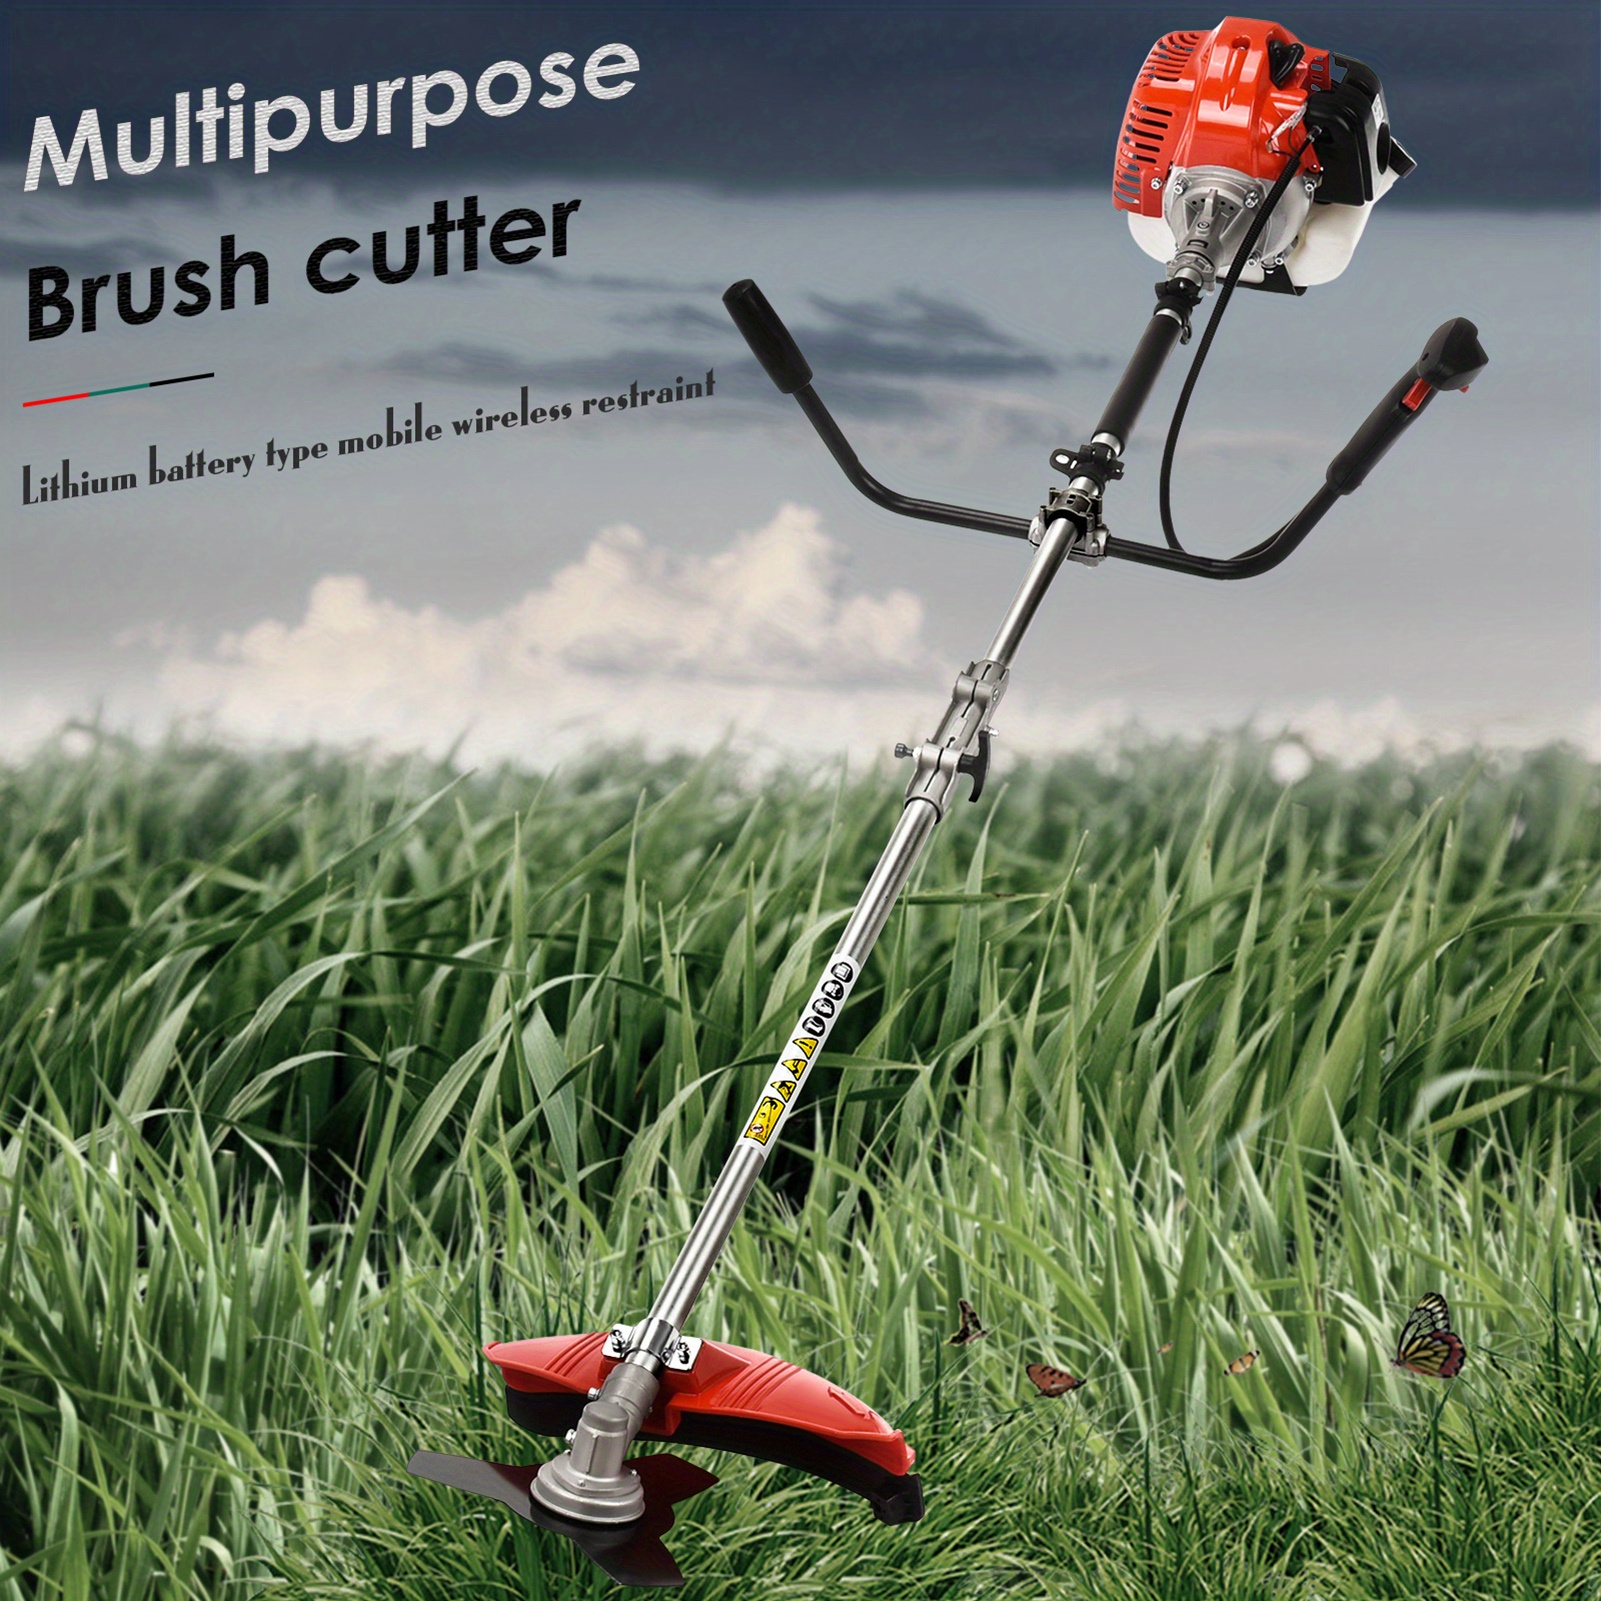 

1pc Powerful Full-featured Protective Accessory Hedge Trimmer With A 70.87*13.78*13.78 Inches 52cc Engine. Two-stroke Gas Straight Shaft Backpack Lawn Trimmer.